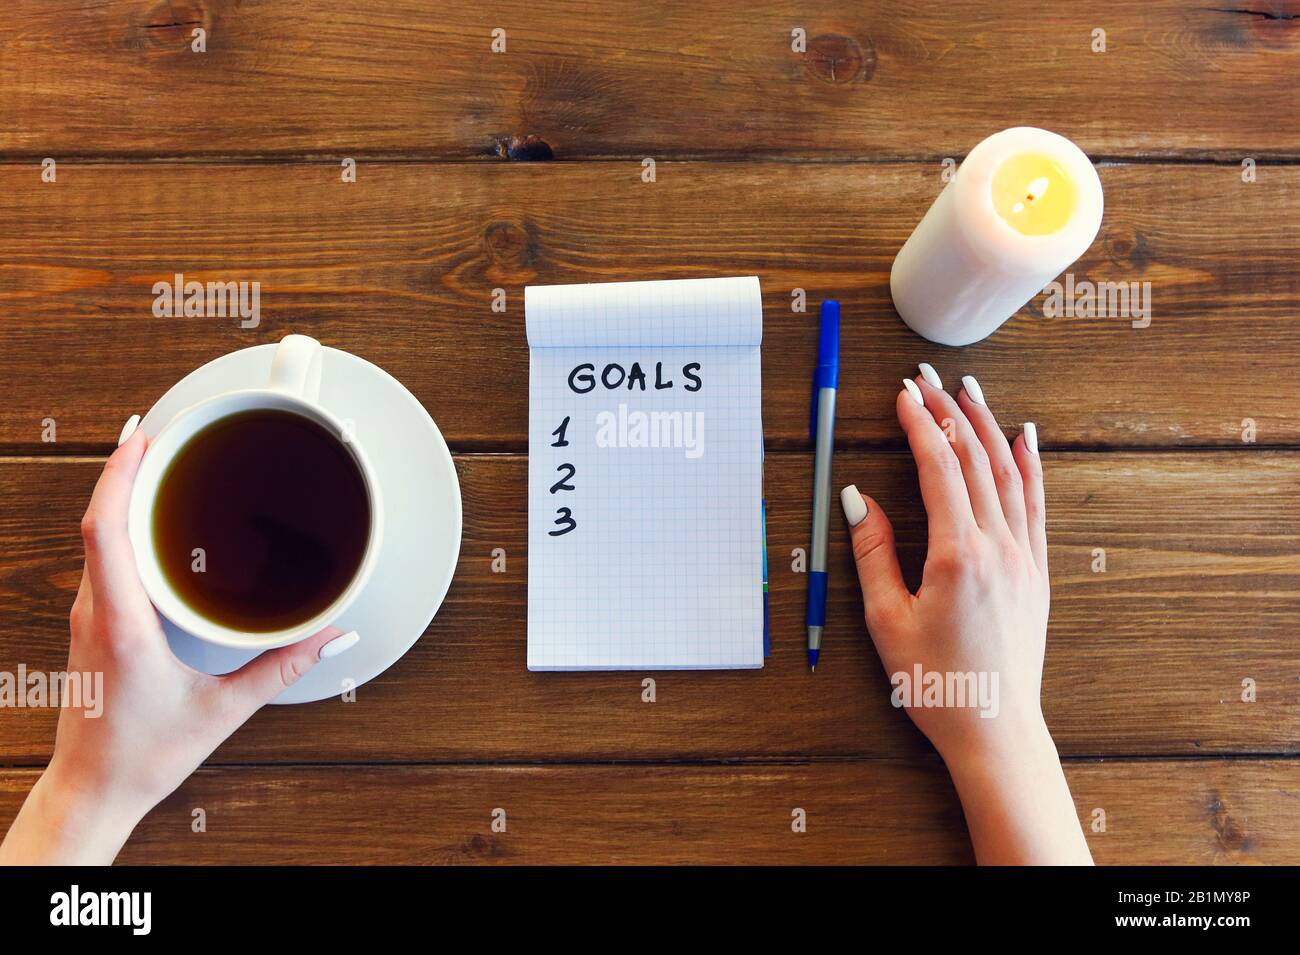 Female hand with pen writing goals in empty notebook on wooden table background with coffee and burning candle Stock Photo